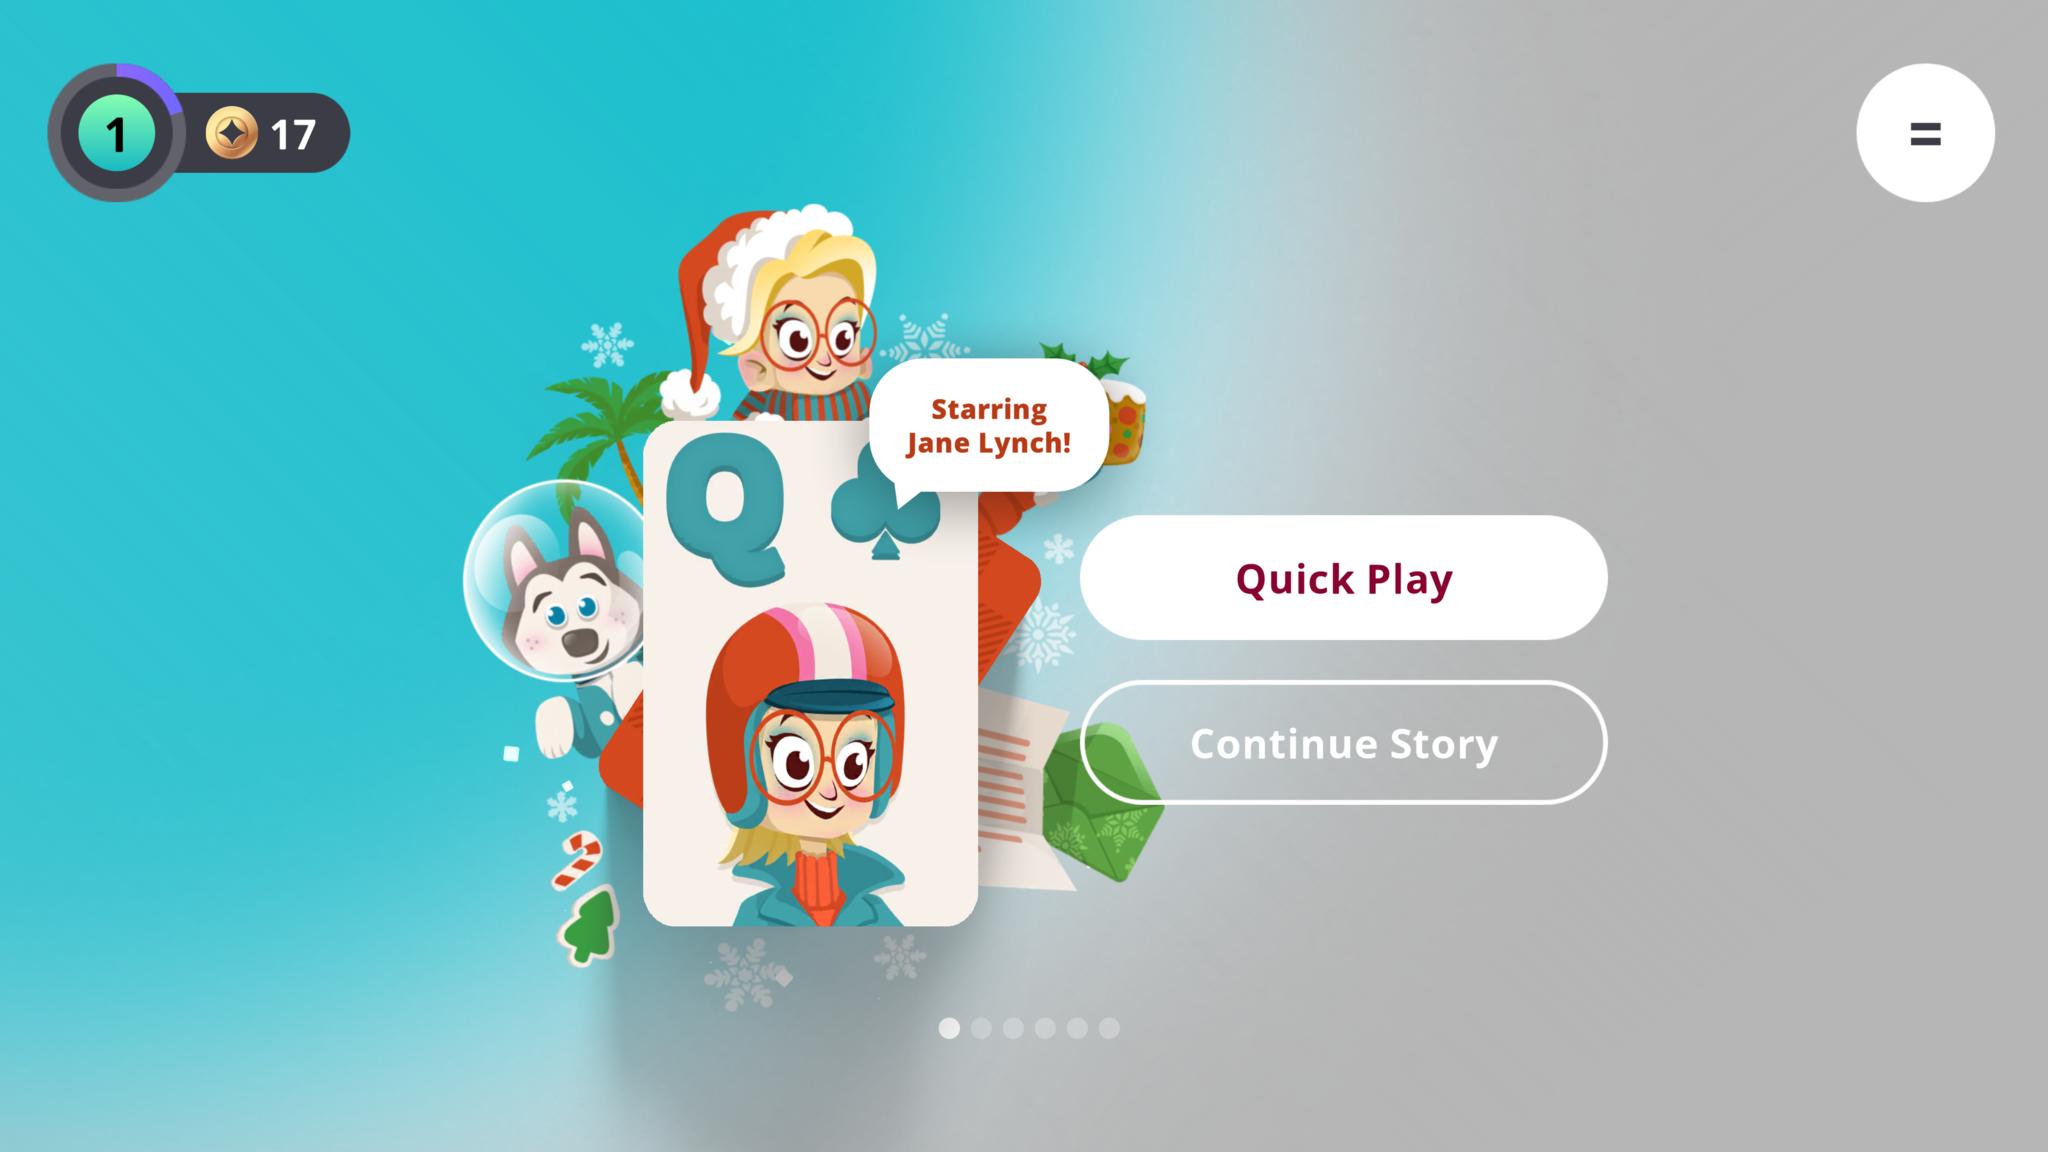 Apple Arcade’s Solitaire Stories bags ‘Glee’ star Jane Lynch for a new holiday story